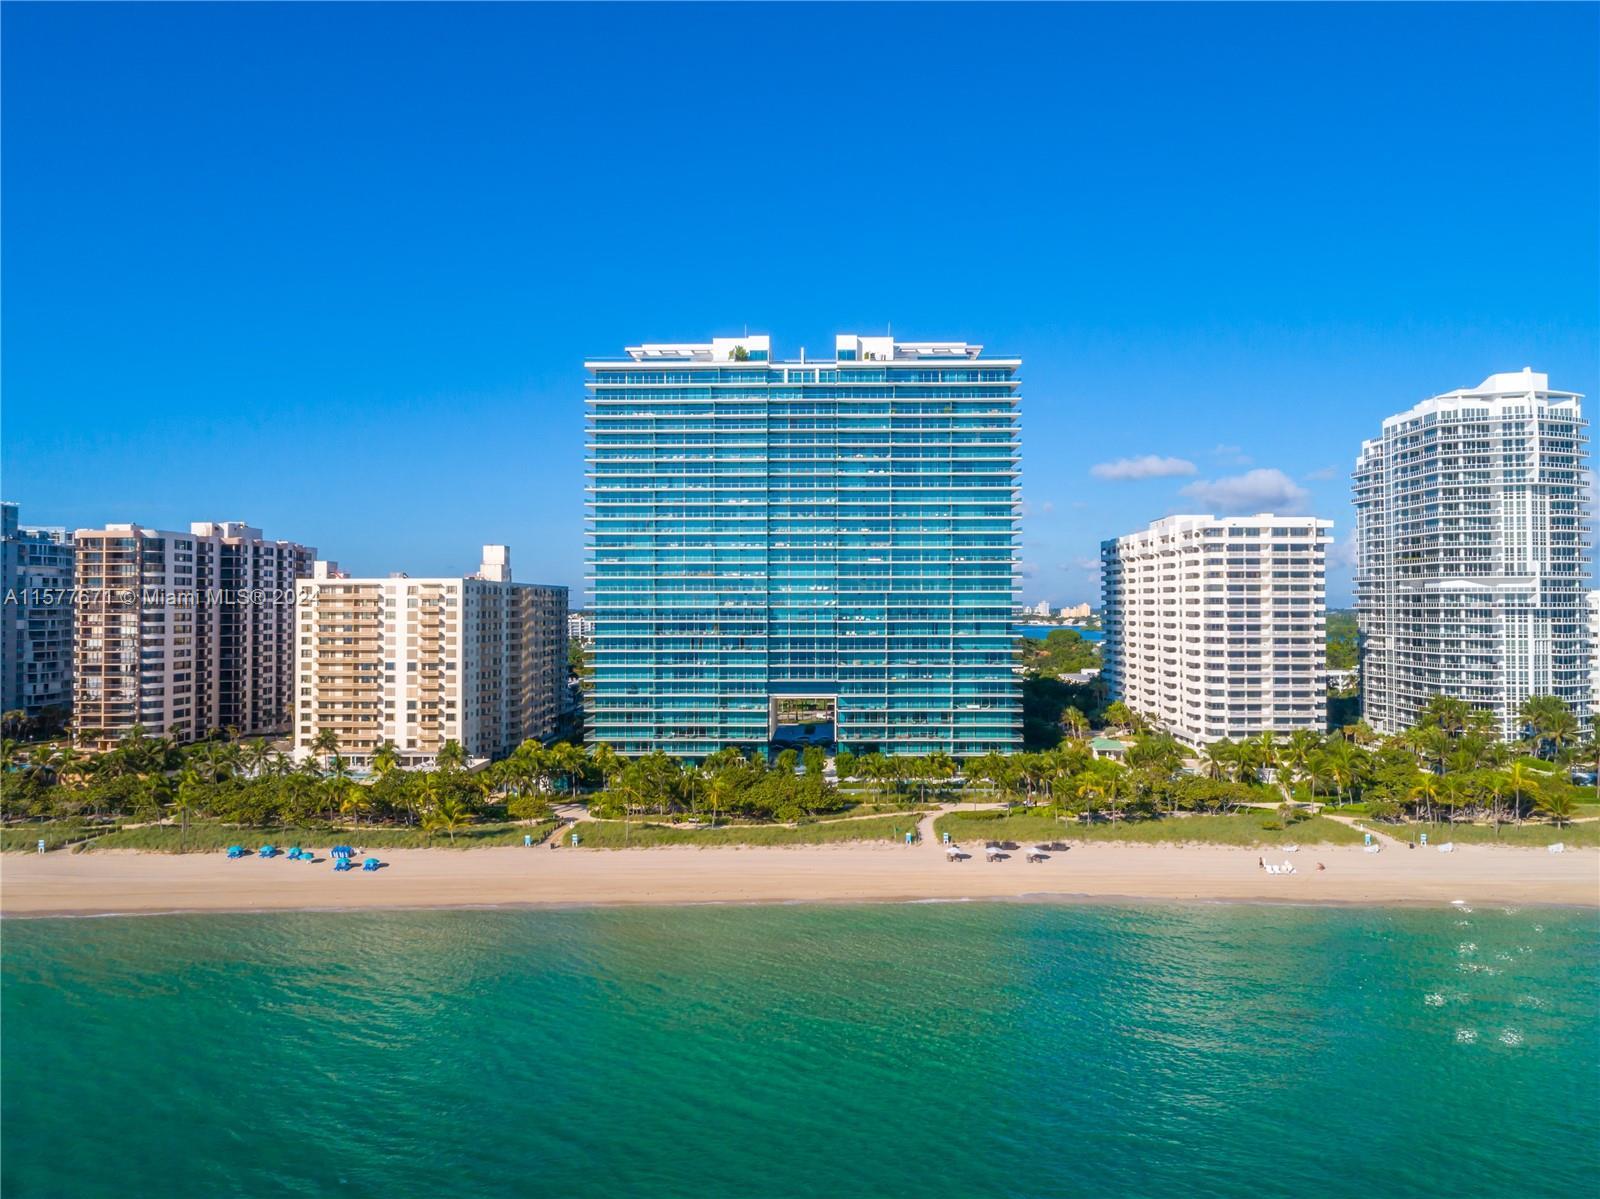 Experience the epitome of luxury living at Oceana Bal Harbour offering a five-star lifestyle with re